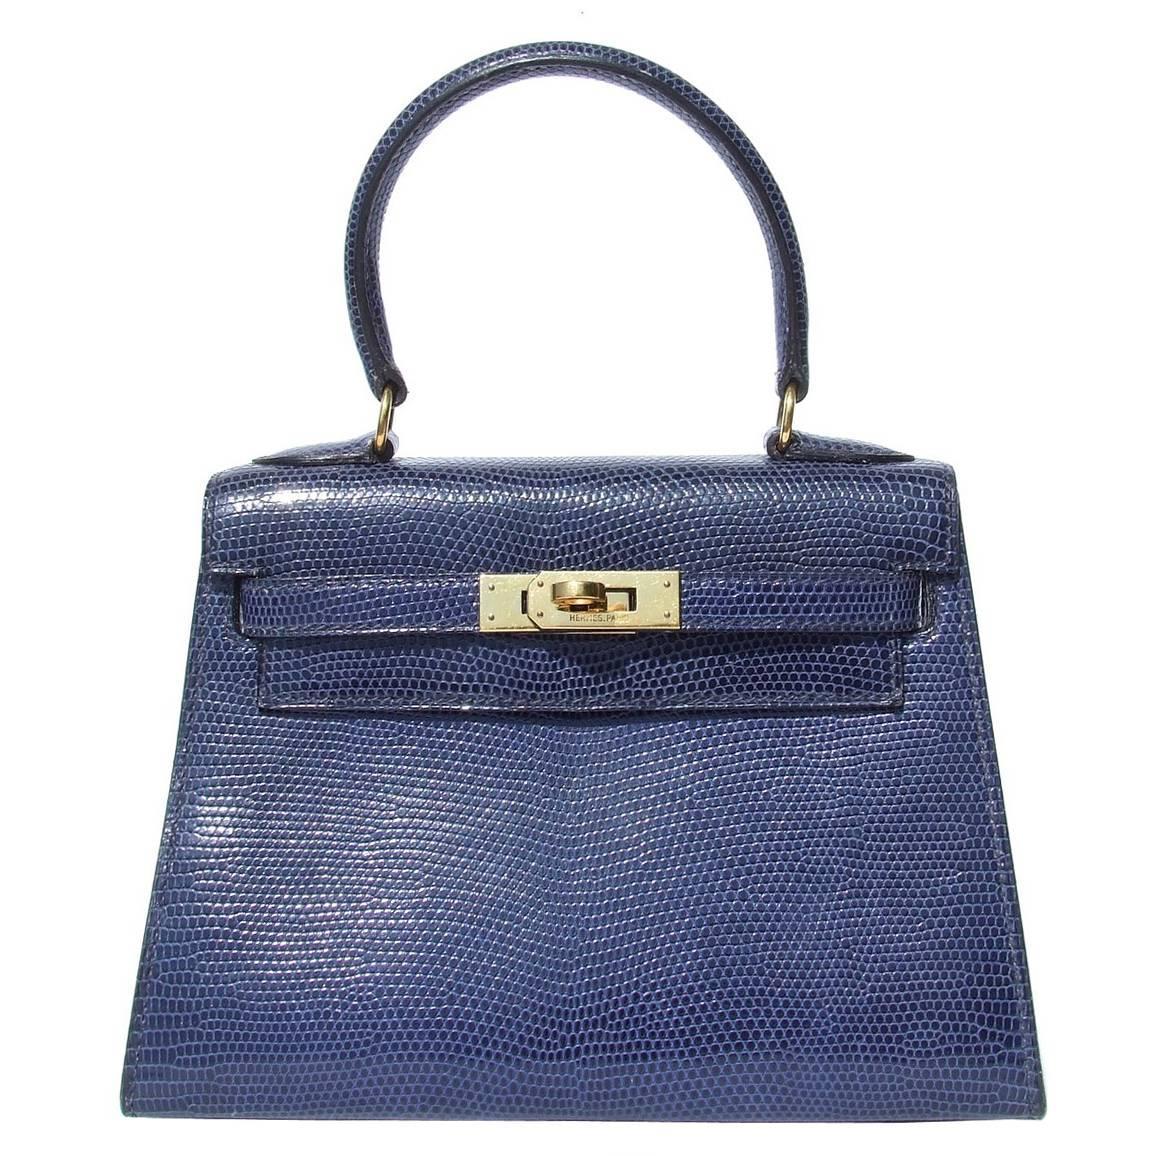 Exceptional Hermes Mini Kelly 20 cm Bag 3 ways Blue Lizard Gold Hdw For Sale at 1stdibs